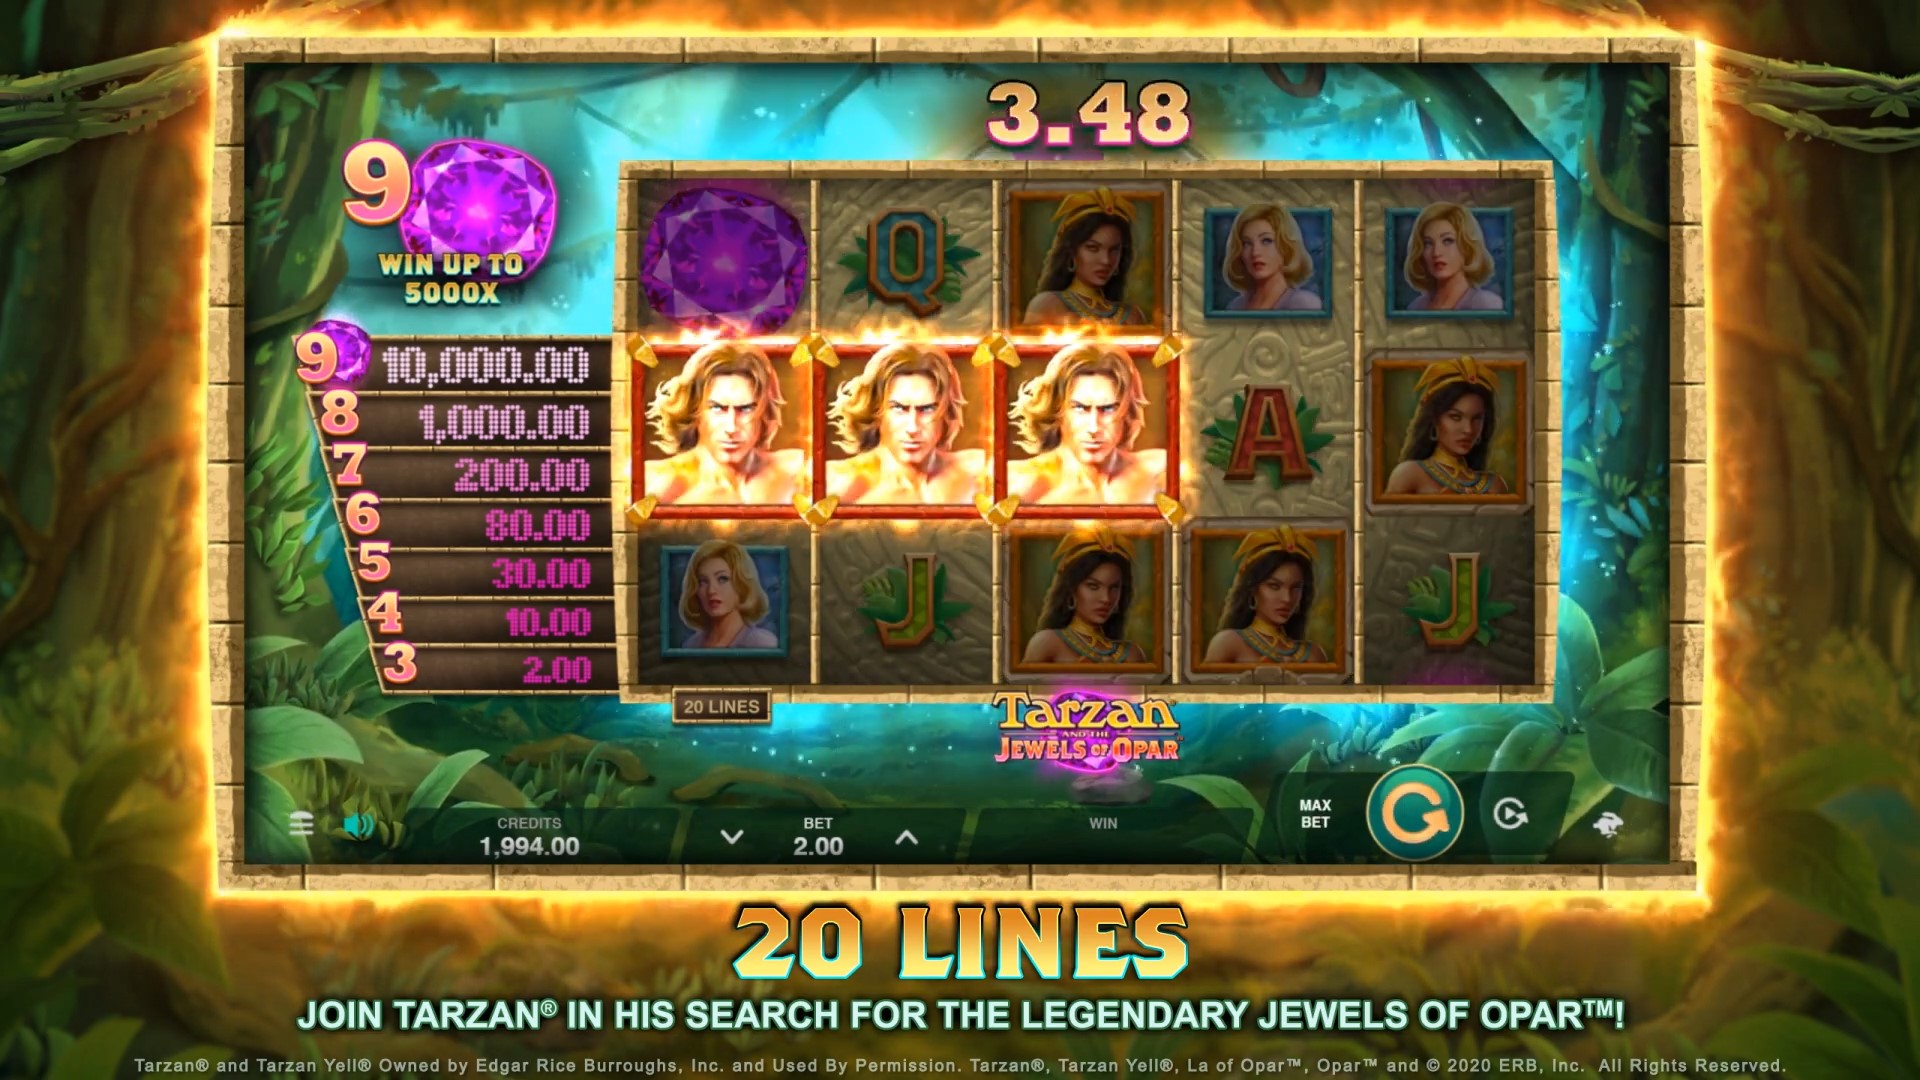 Tarzan and the jewels of Opar grid 1 Microgaming